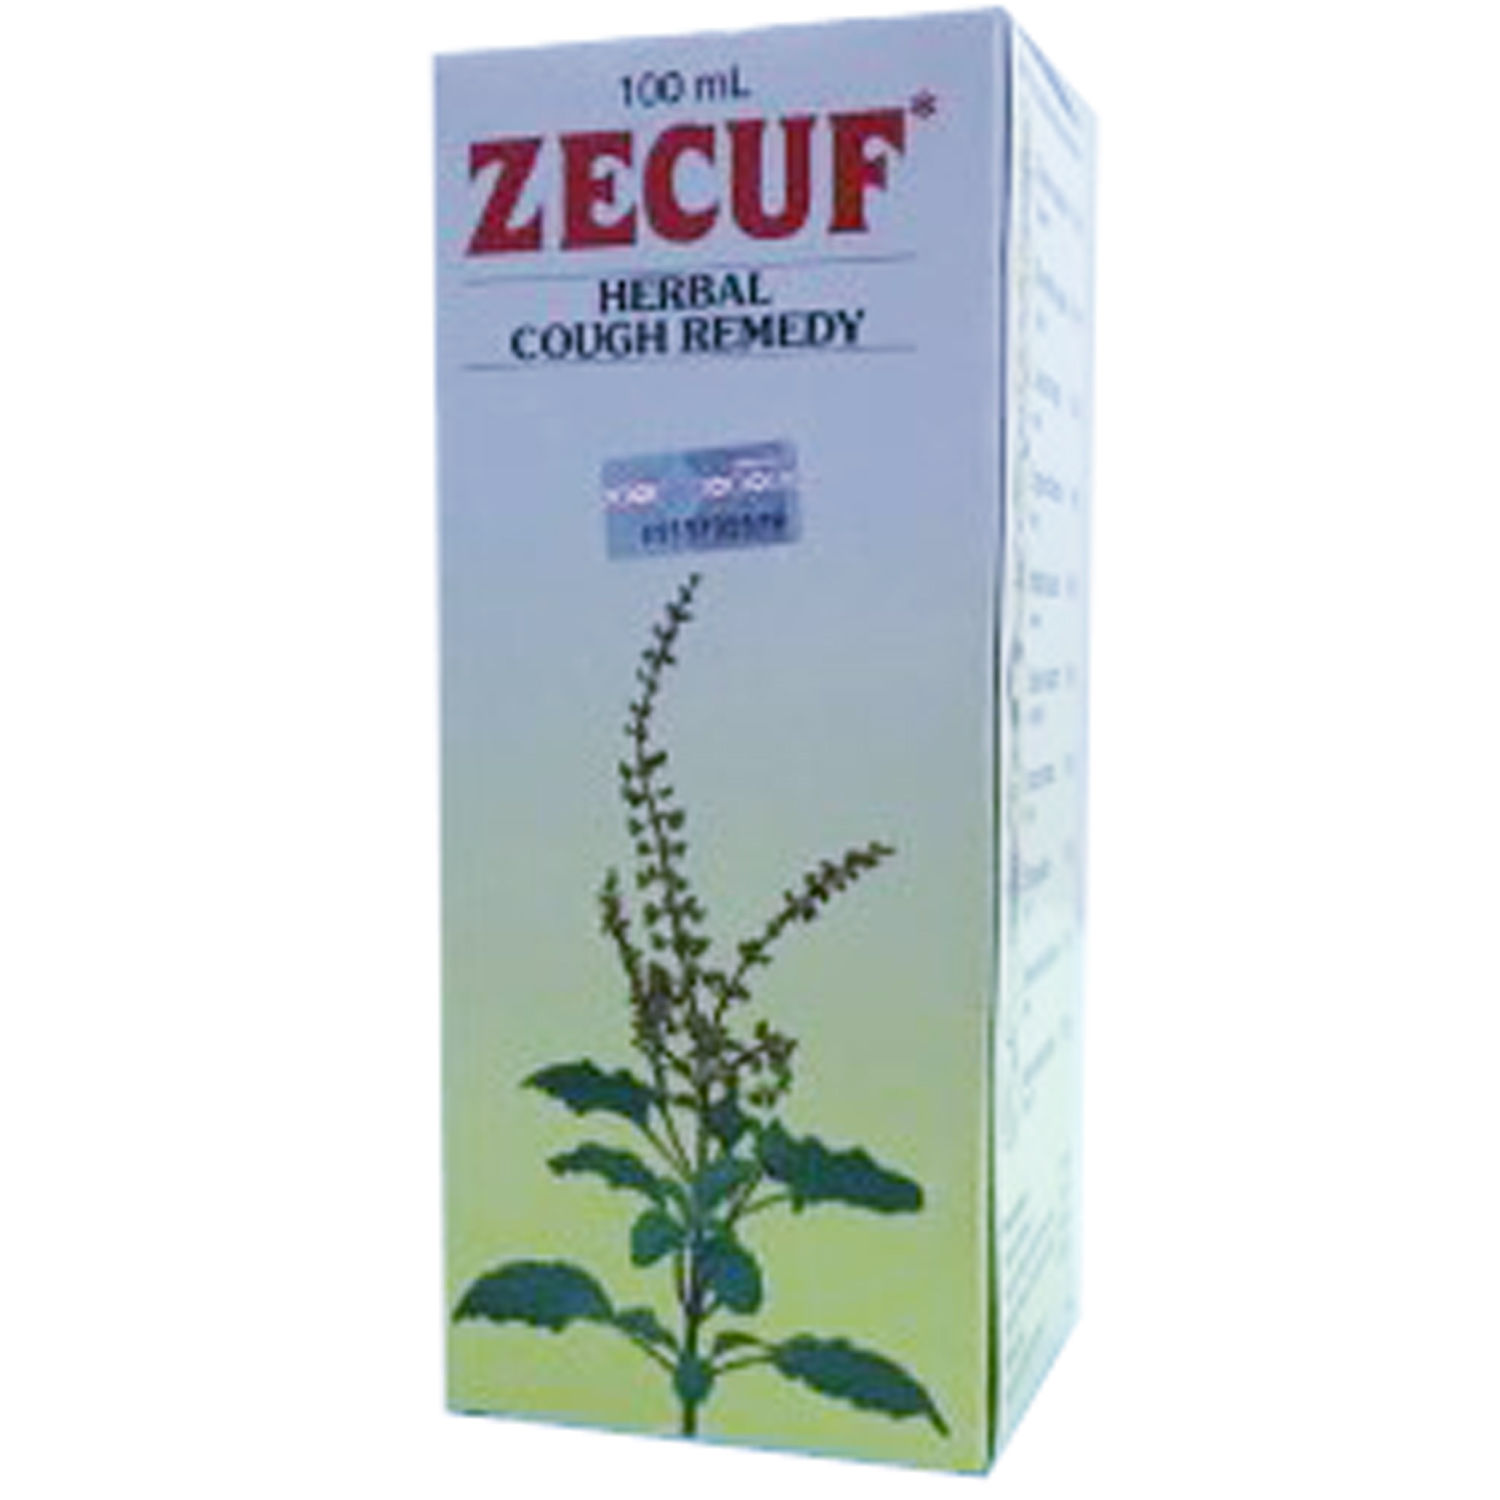 Zecuf Herbal Cough Remedy, 100 ml, Pack of 1 